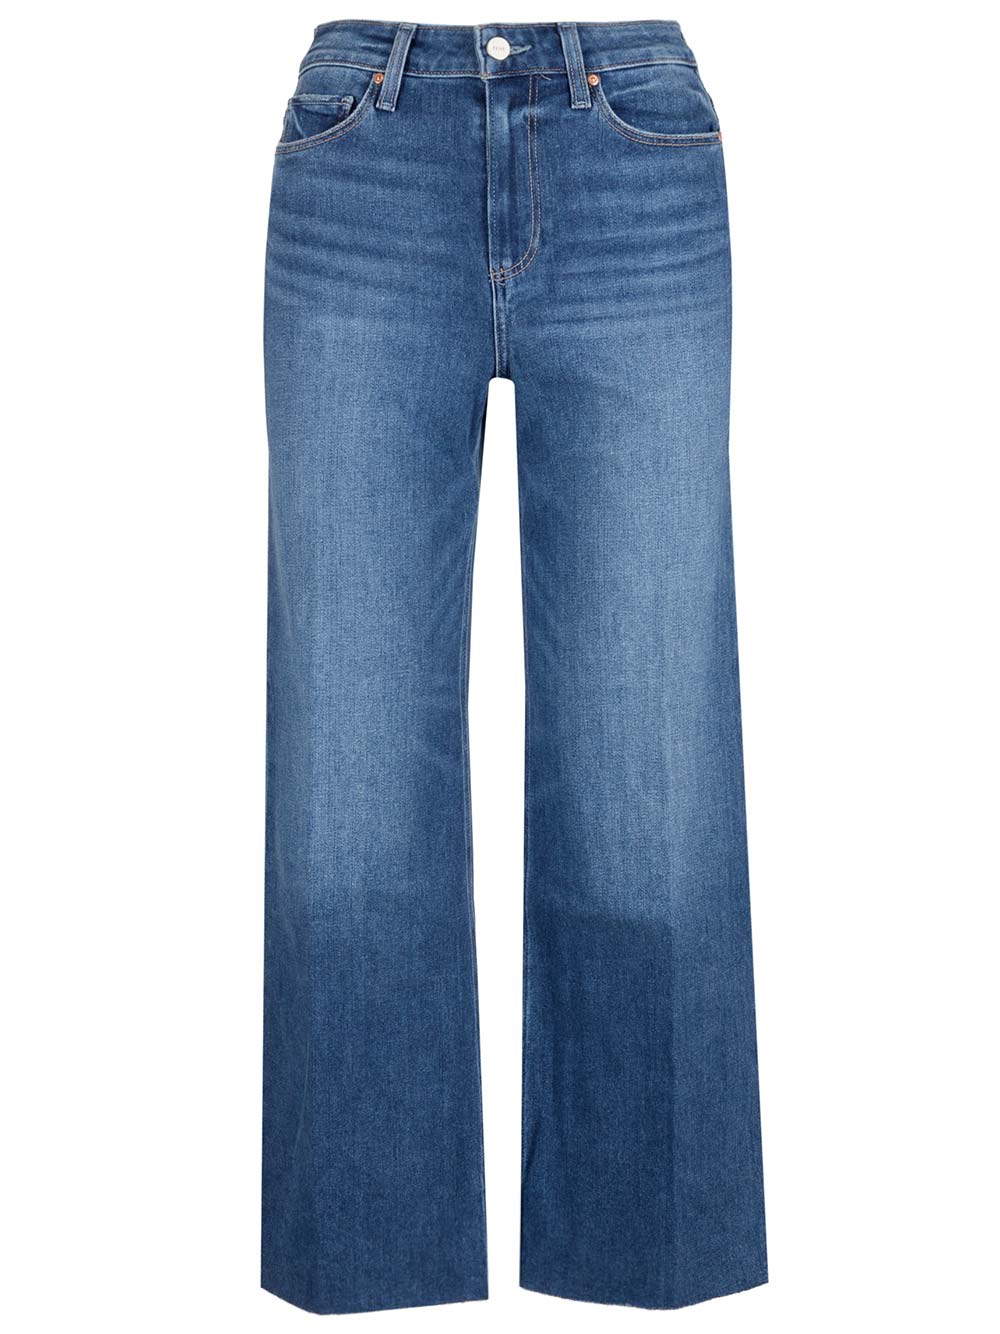 PAIGE ANESSA CROPPED JEANS